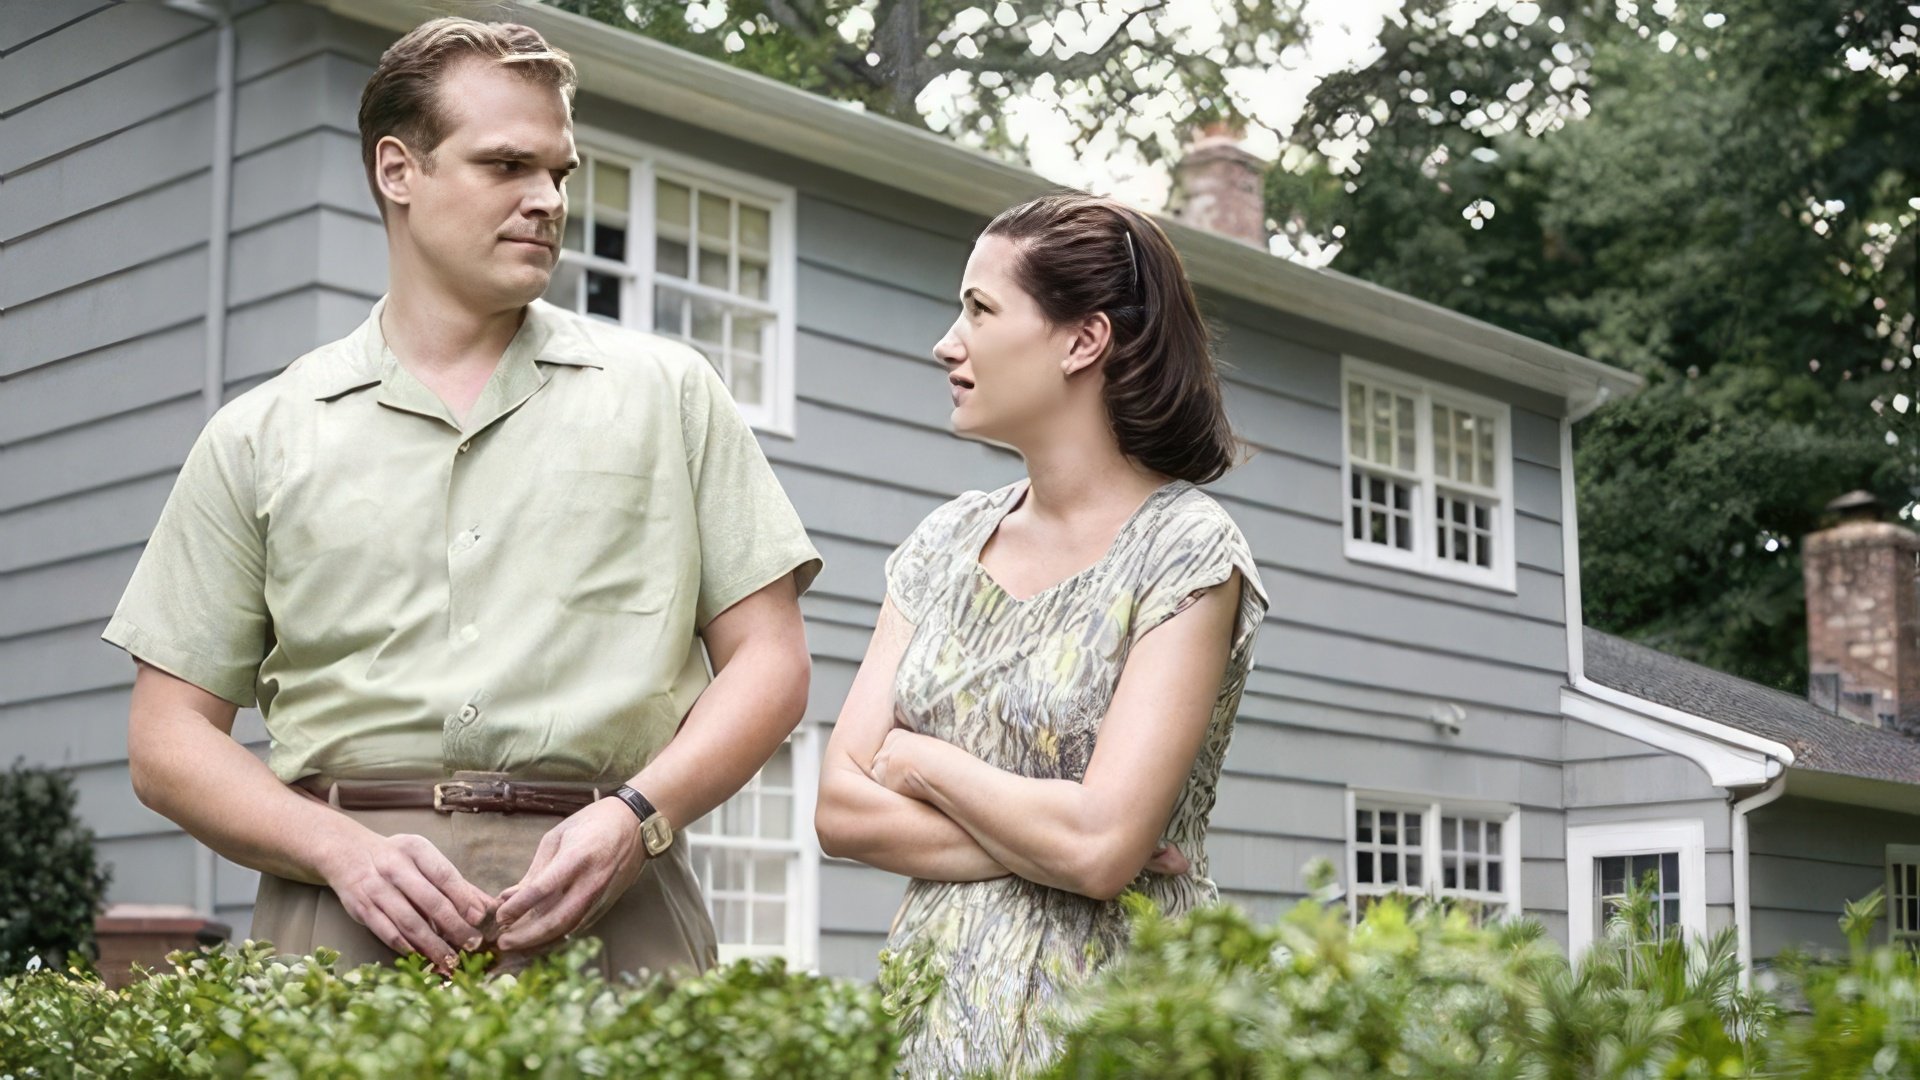 A Frame from the Film Revolutionary Road